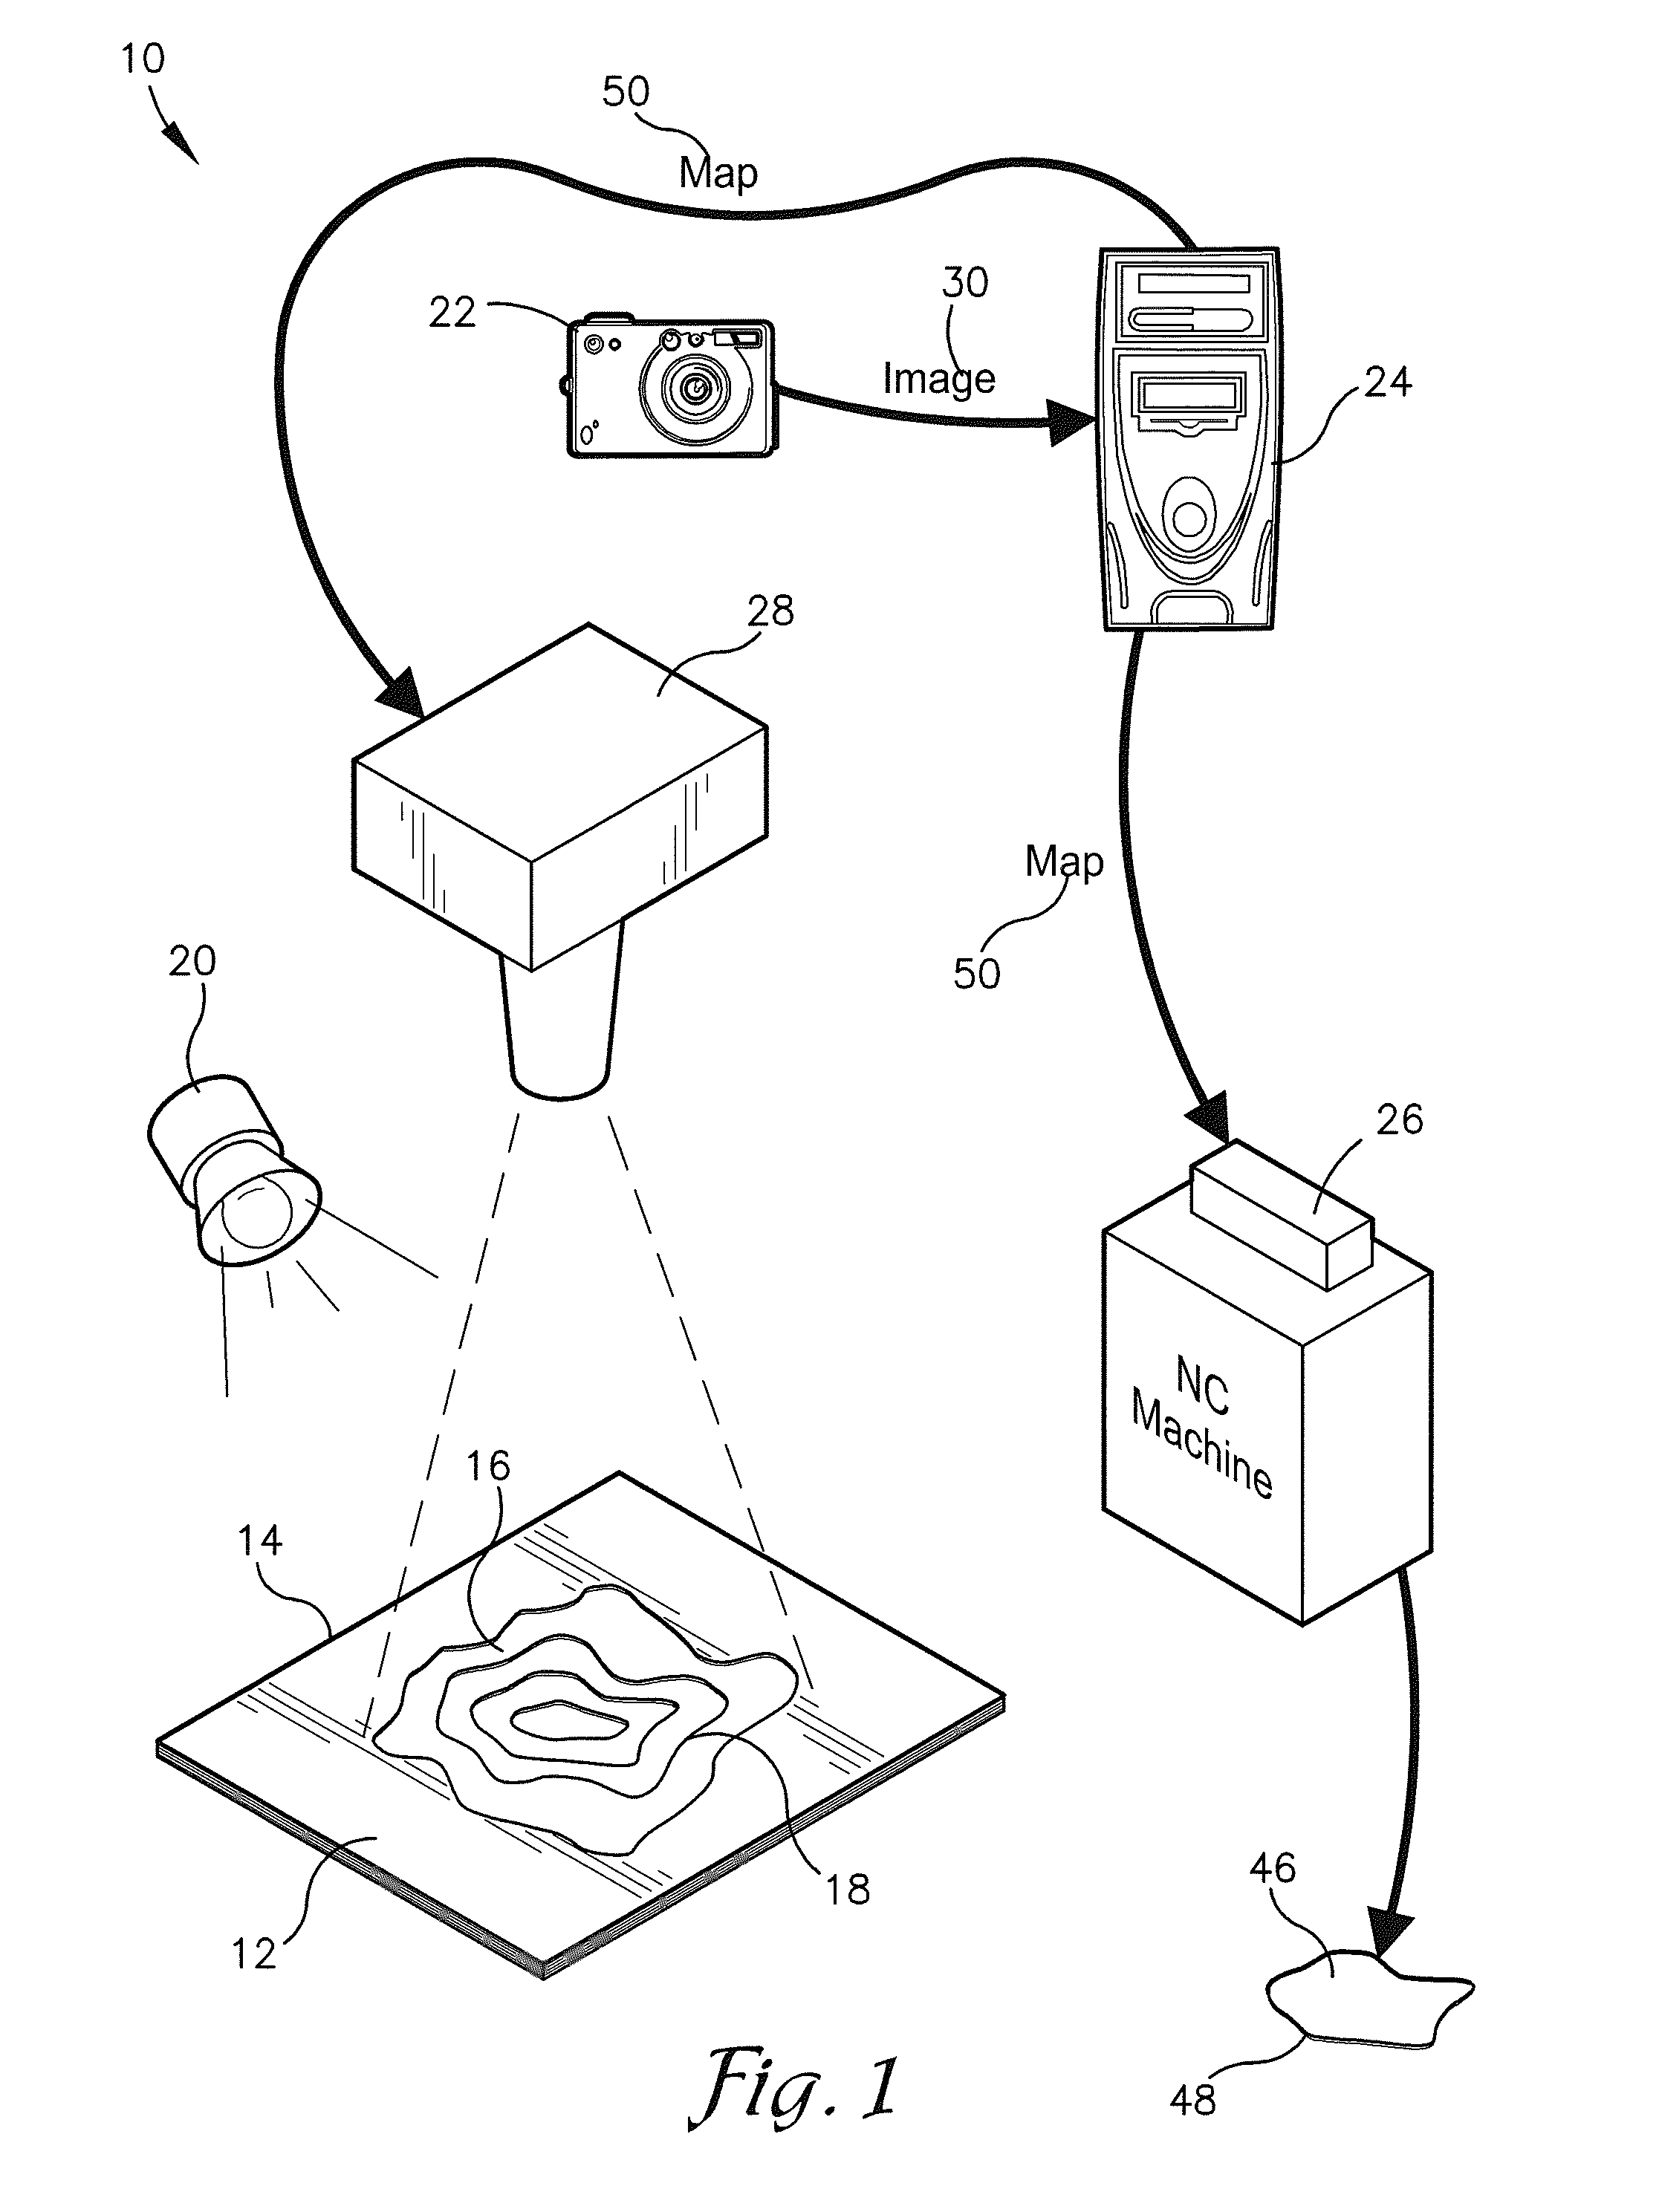 System and method for repairing composite parts